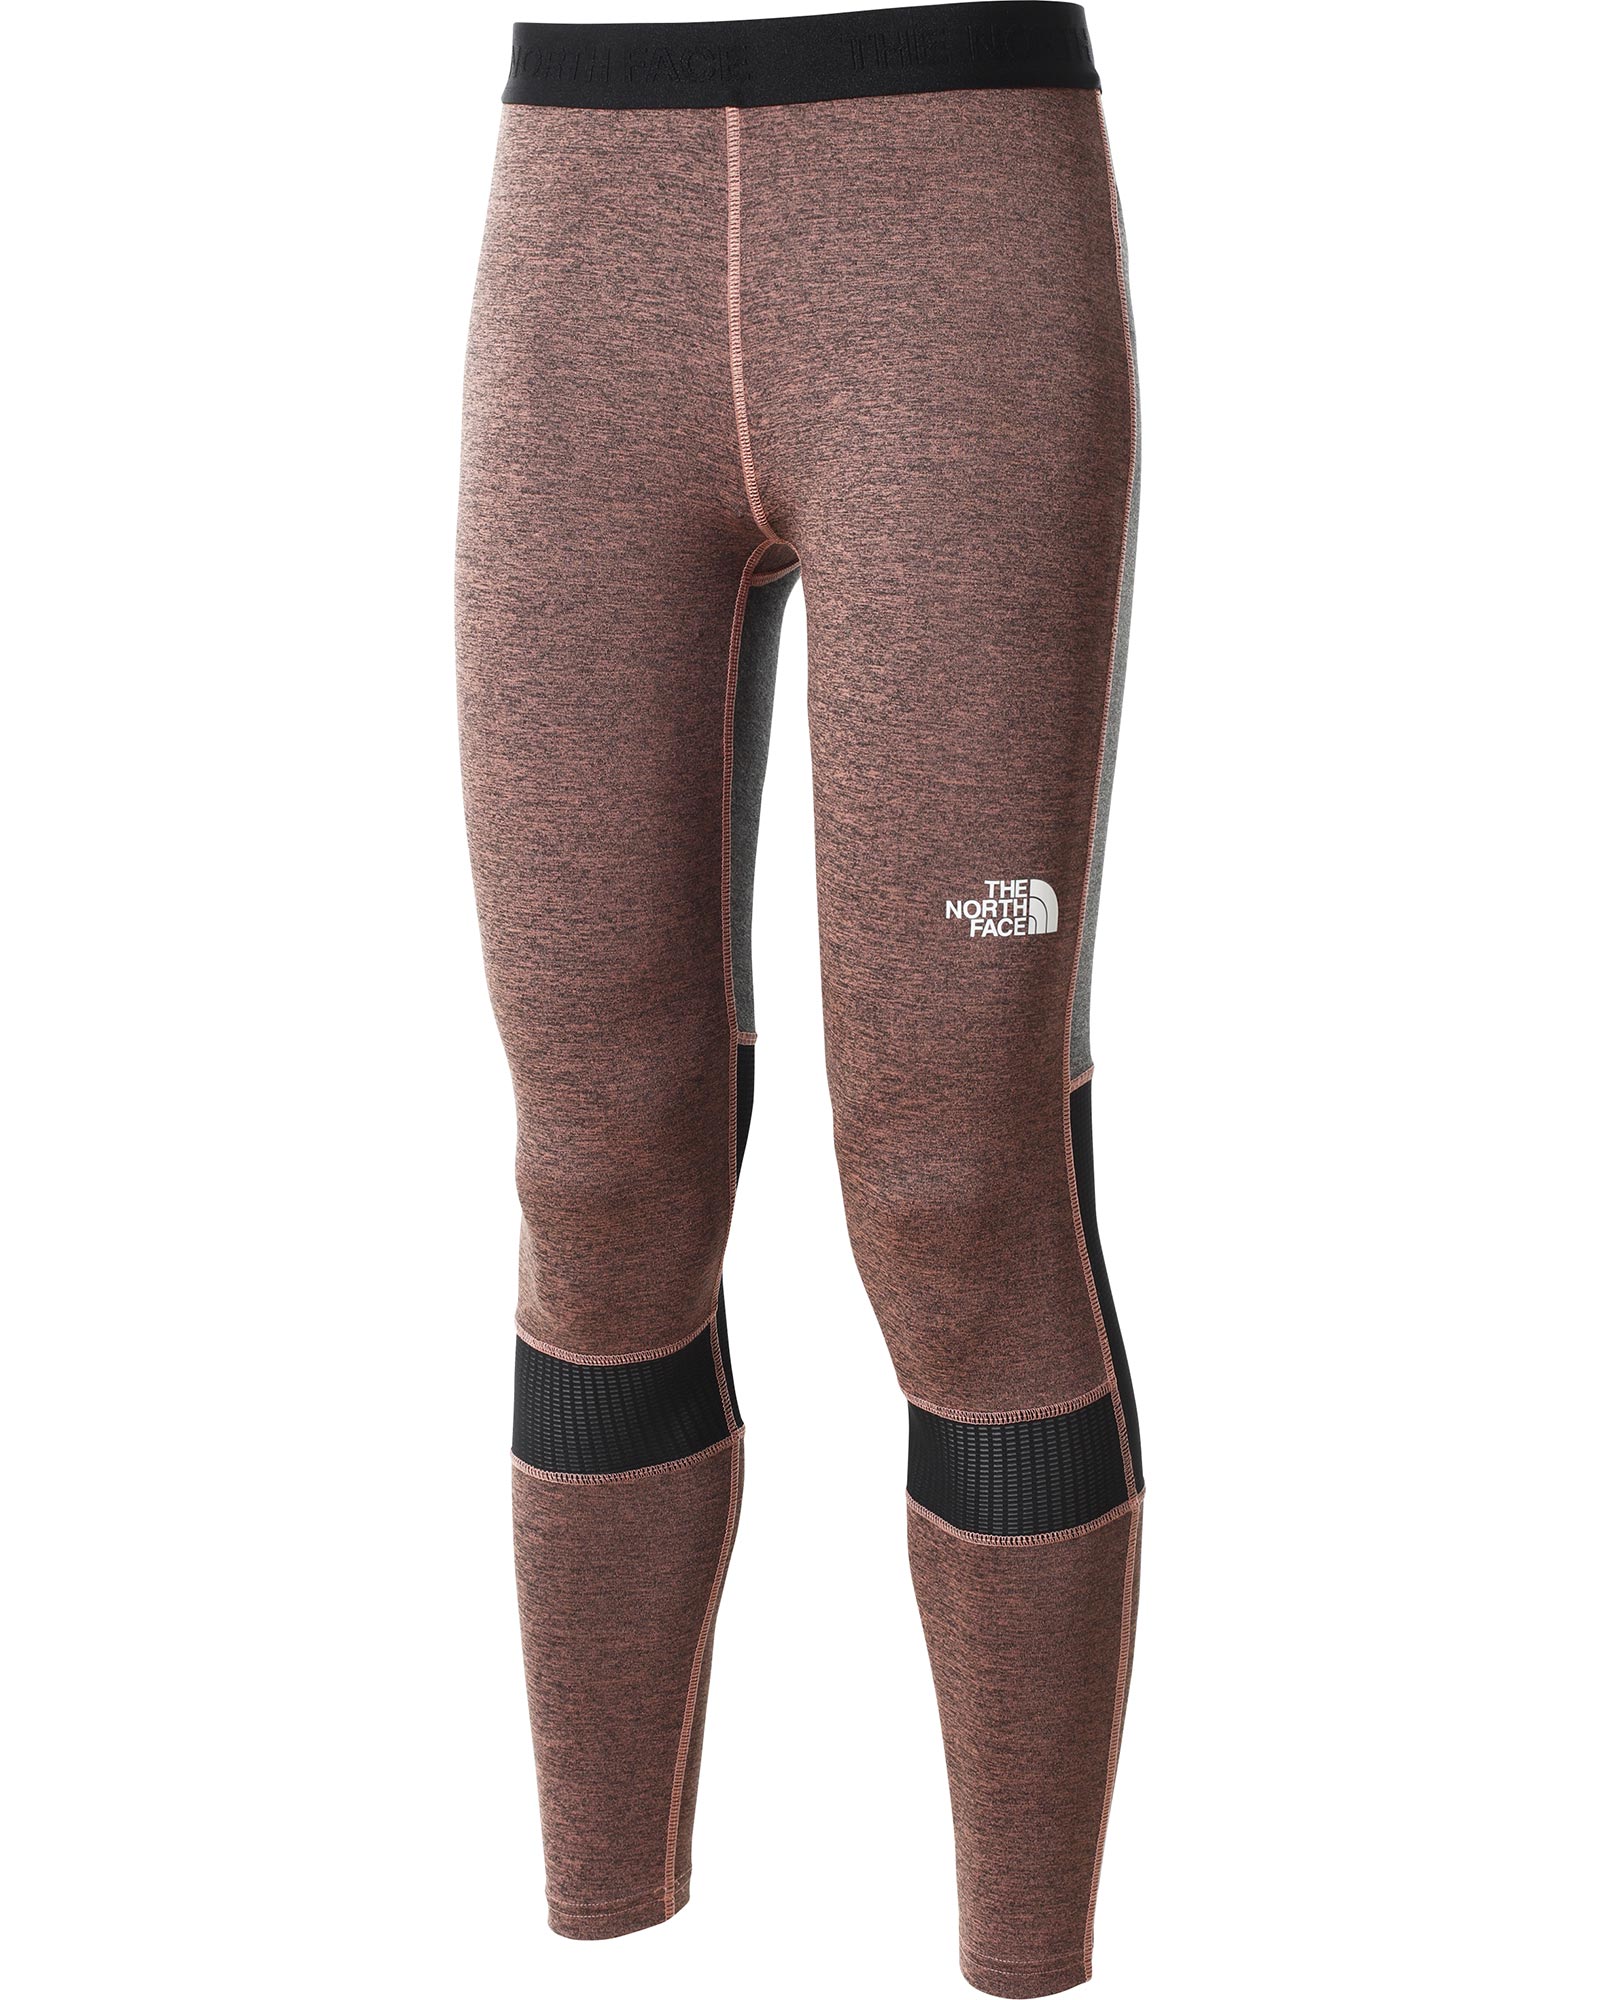 The North Face MA Women’s Tights - Rose Dawn Heather XS